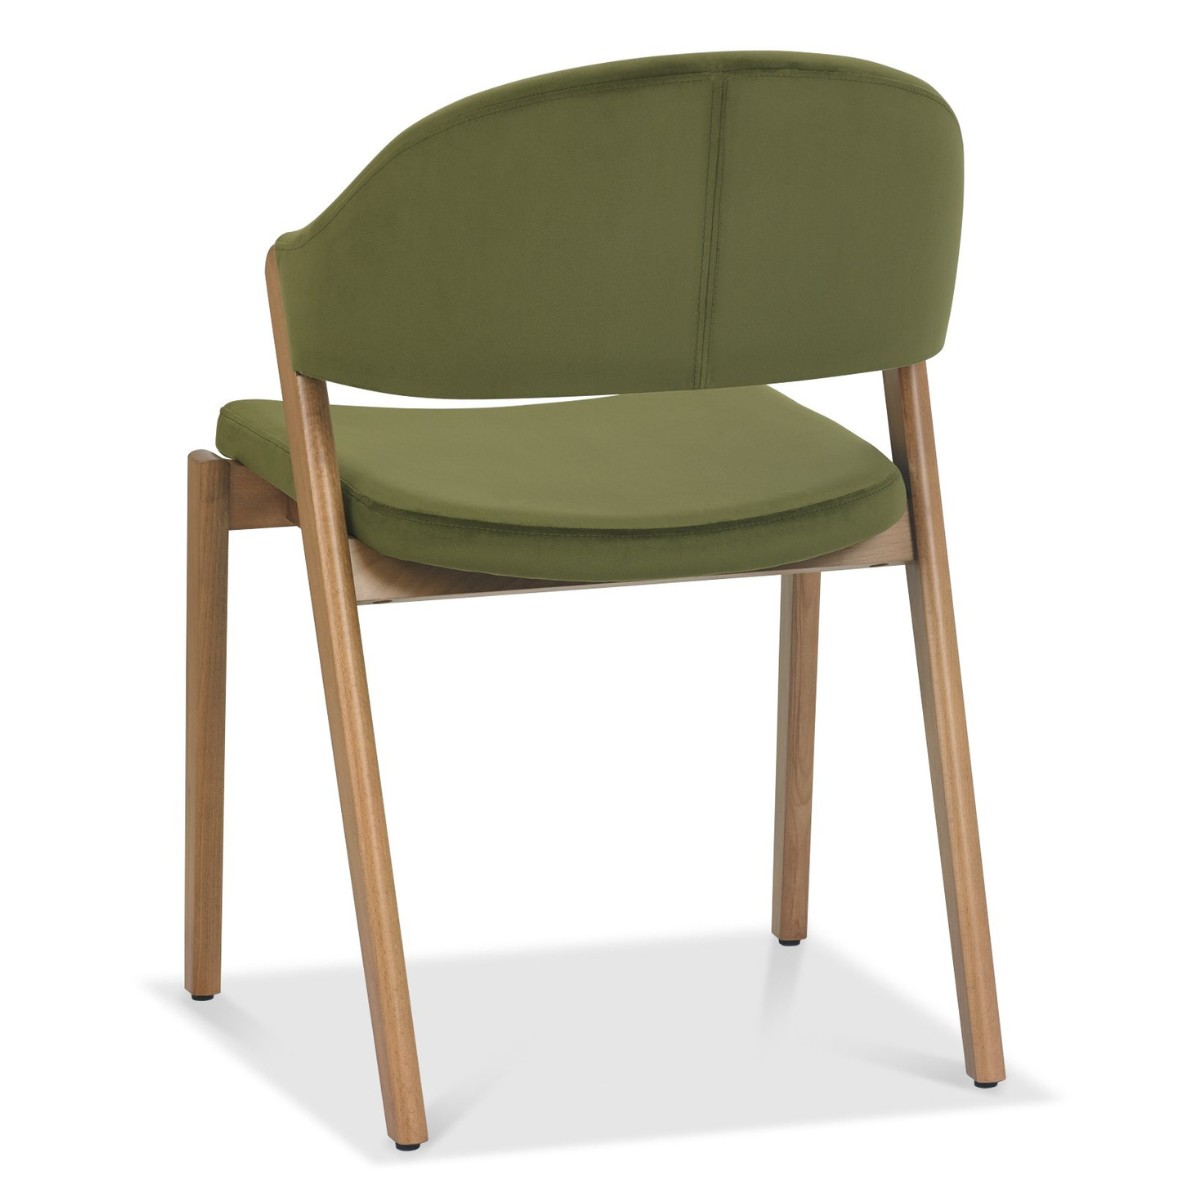 Chambery Rustic Oak Upholstered Dining Chair Green - 3